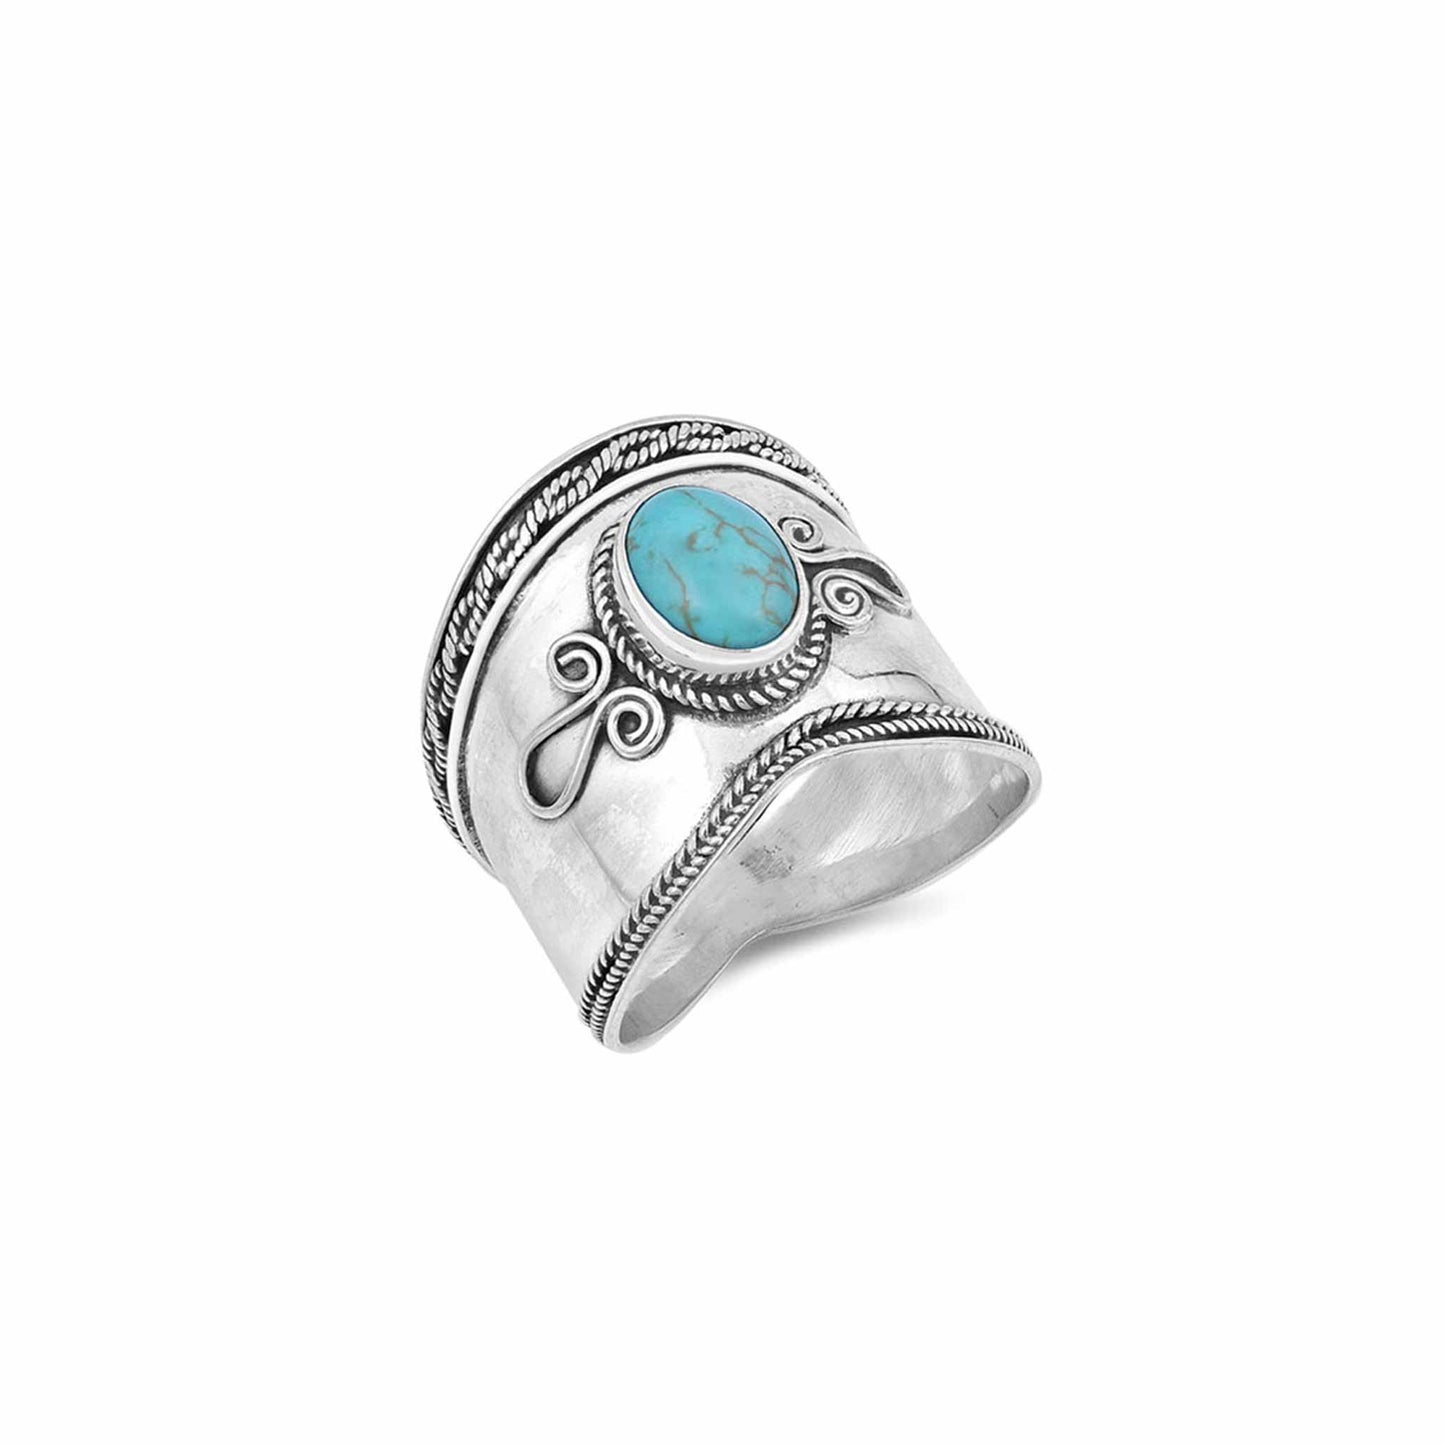 Bali Style Turquoise Sterling Silver Ring